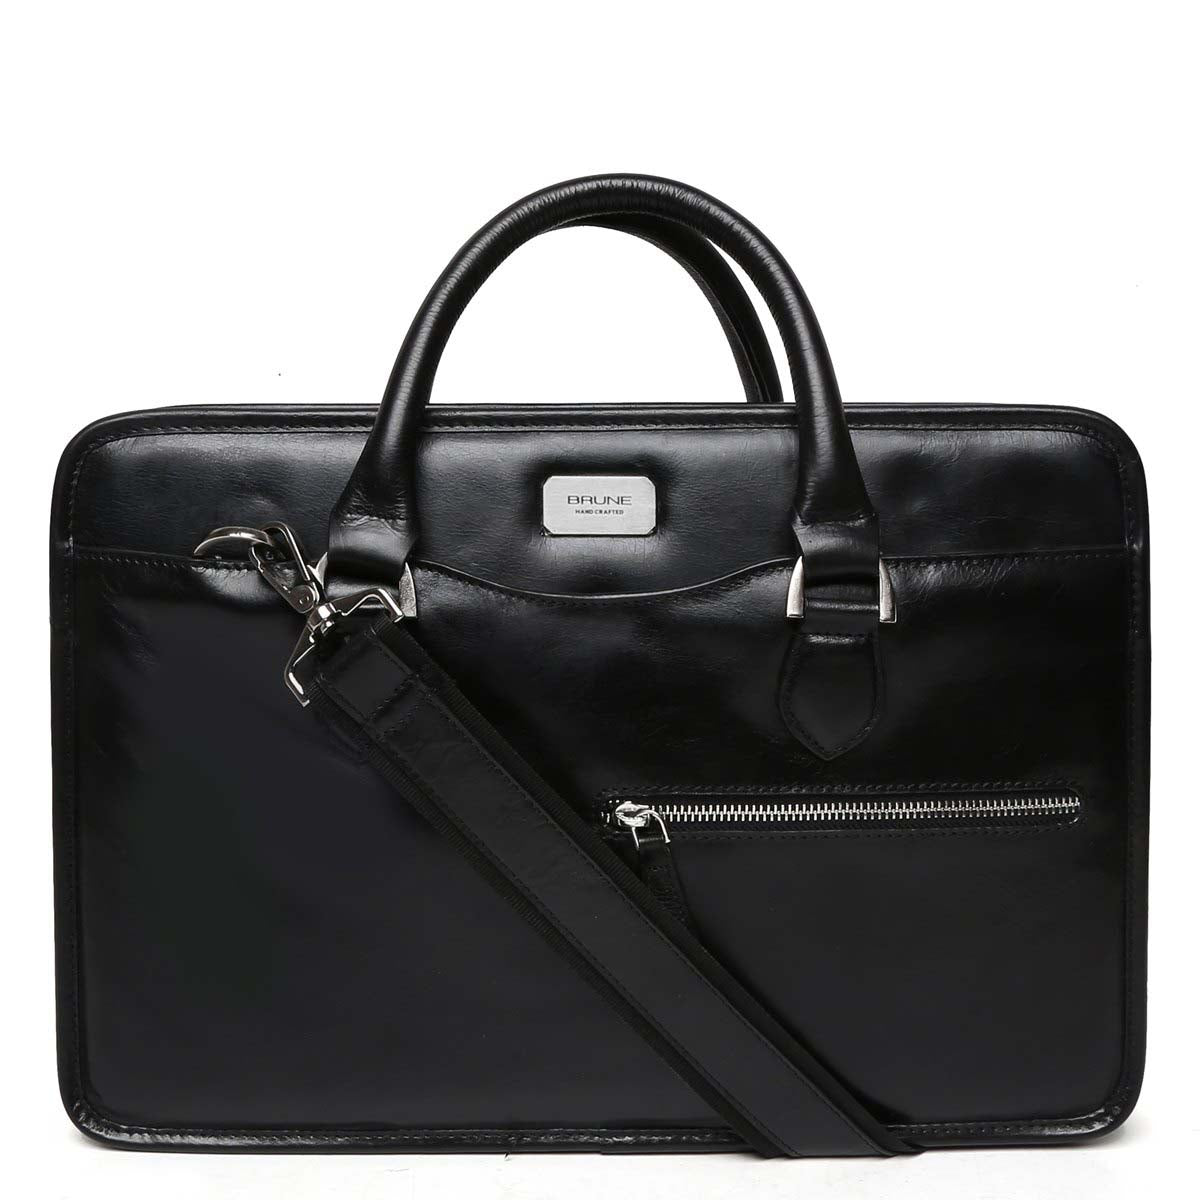 Classic Leather Bag - Laptop And Office Bag - Black